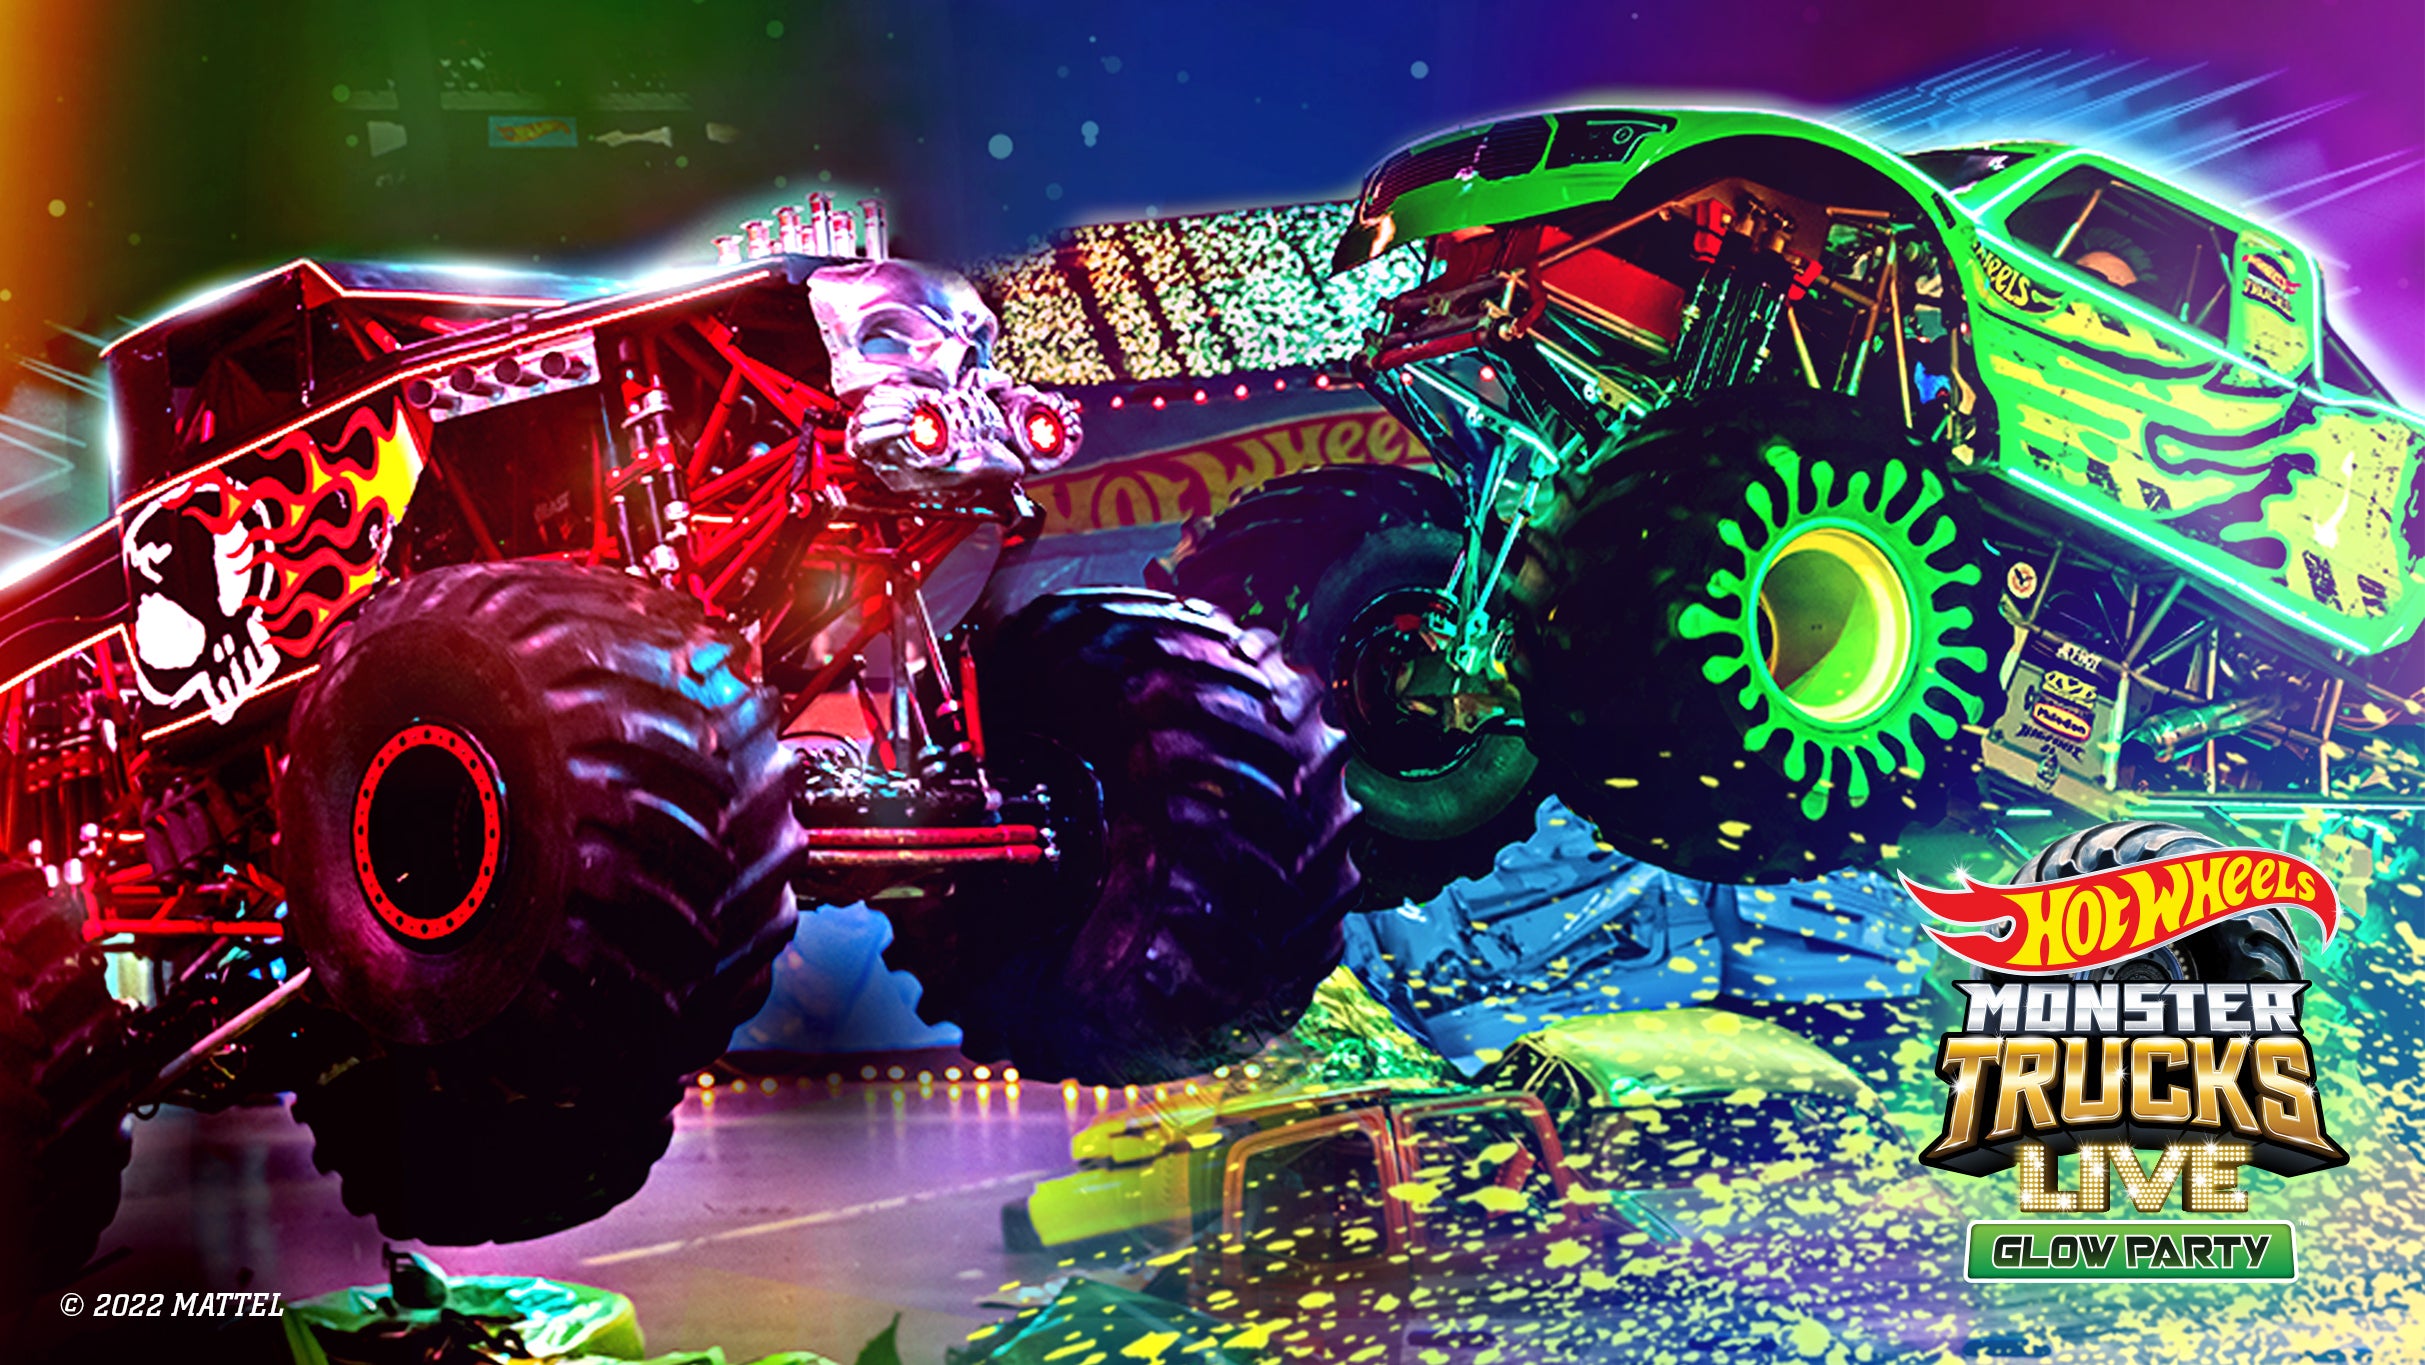 Hot Wheels Monster Trucks Live - Glow Party